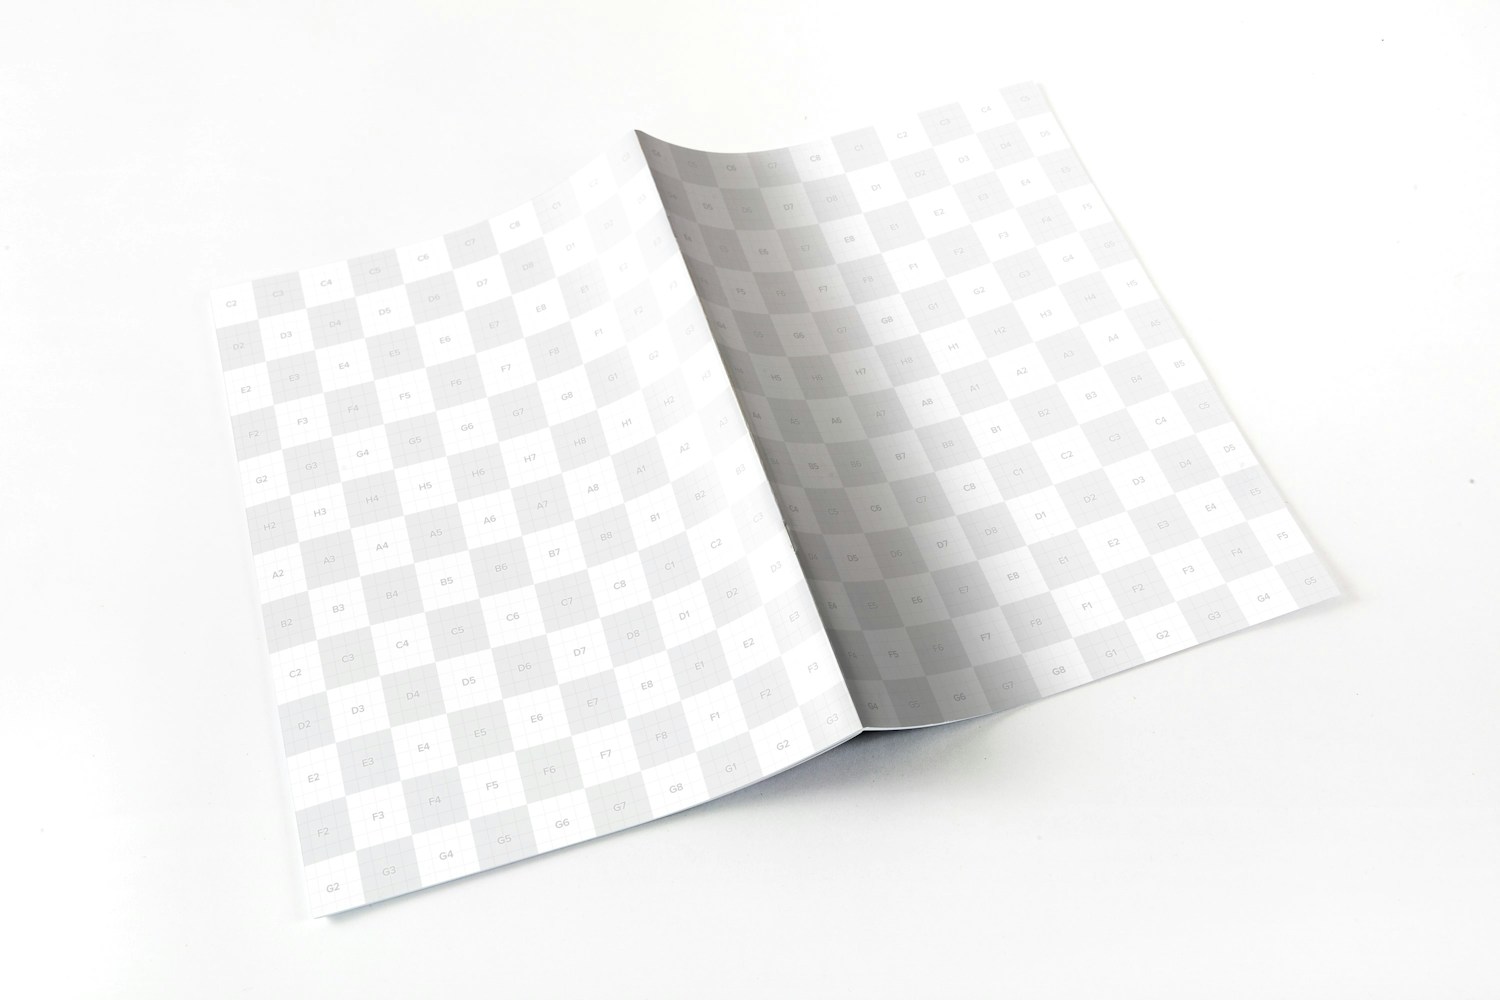 Letter Booklet Spreads Covers Mockup 01